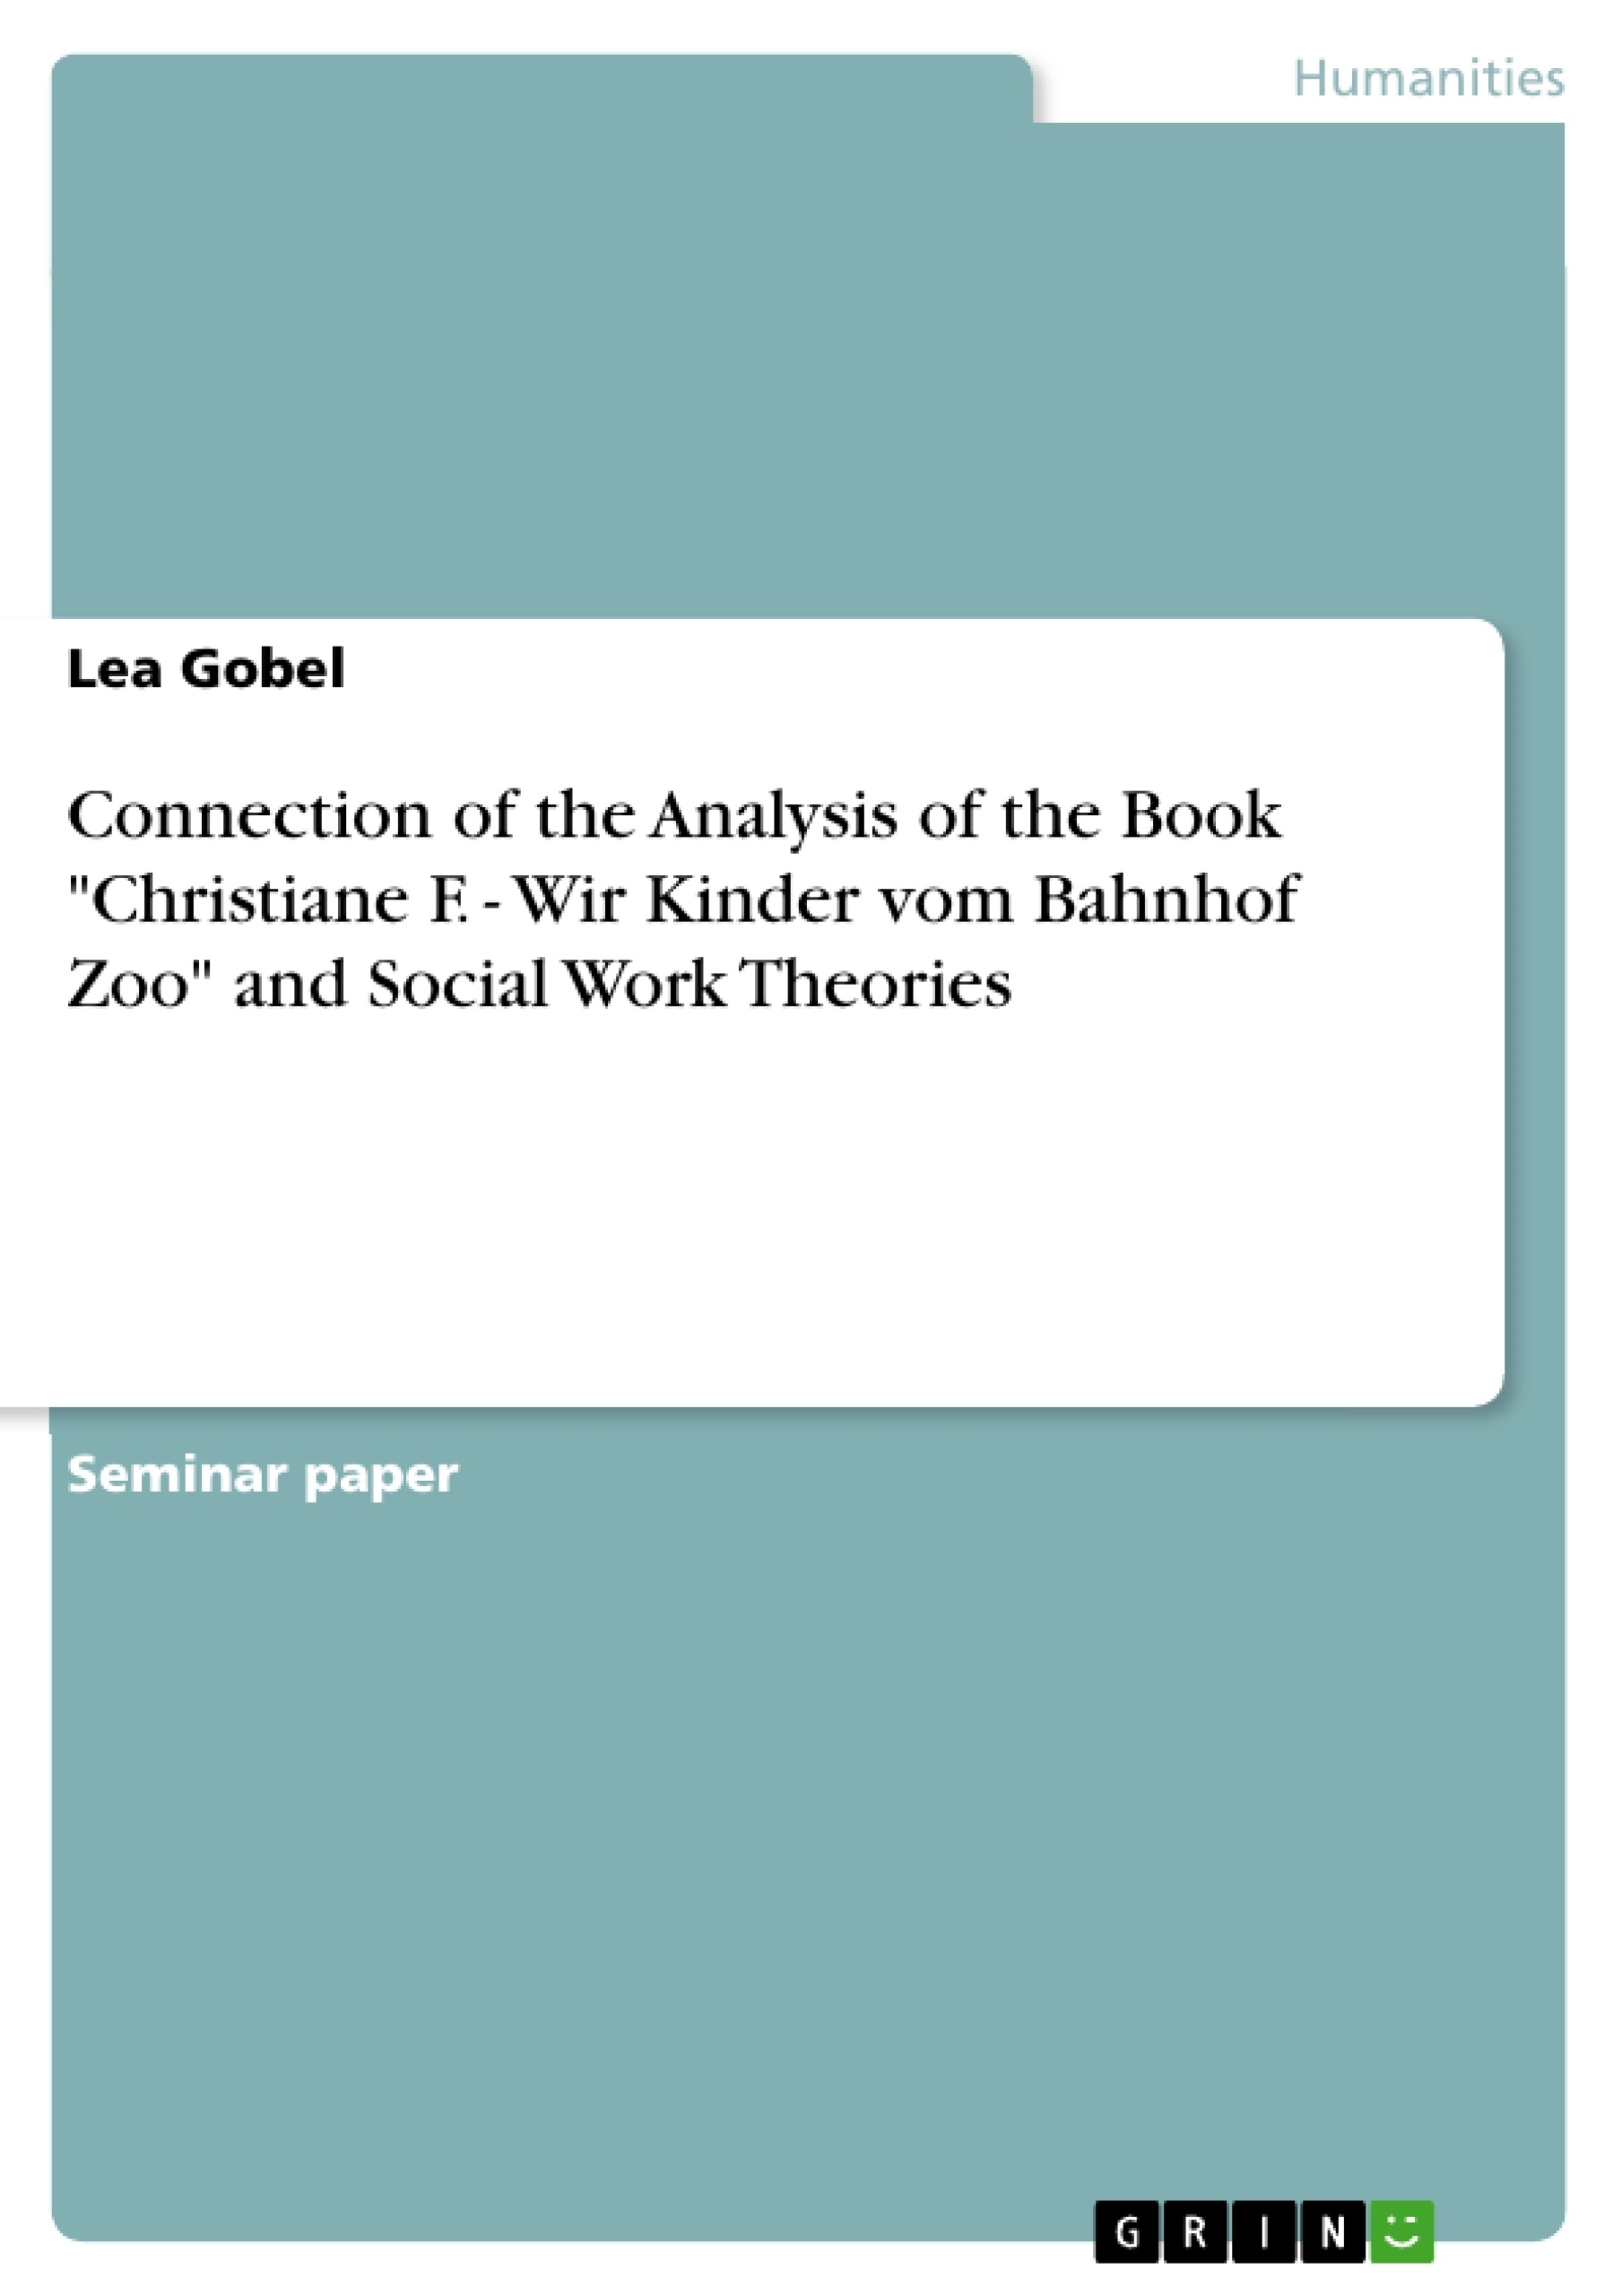 Title: Connection of the Analysis of the Book "Christiane F. - Wir Kinder vom Bahnhof Zoo" and Social Work Theories